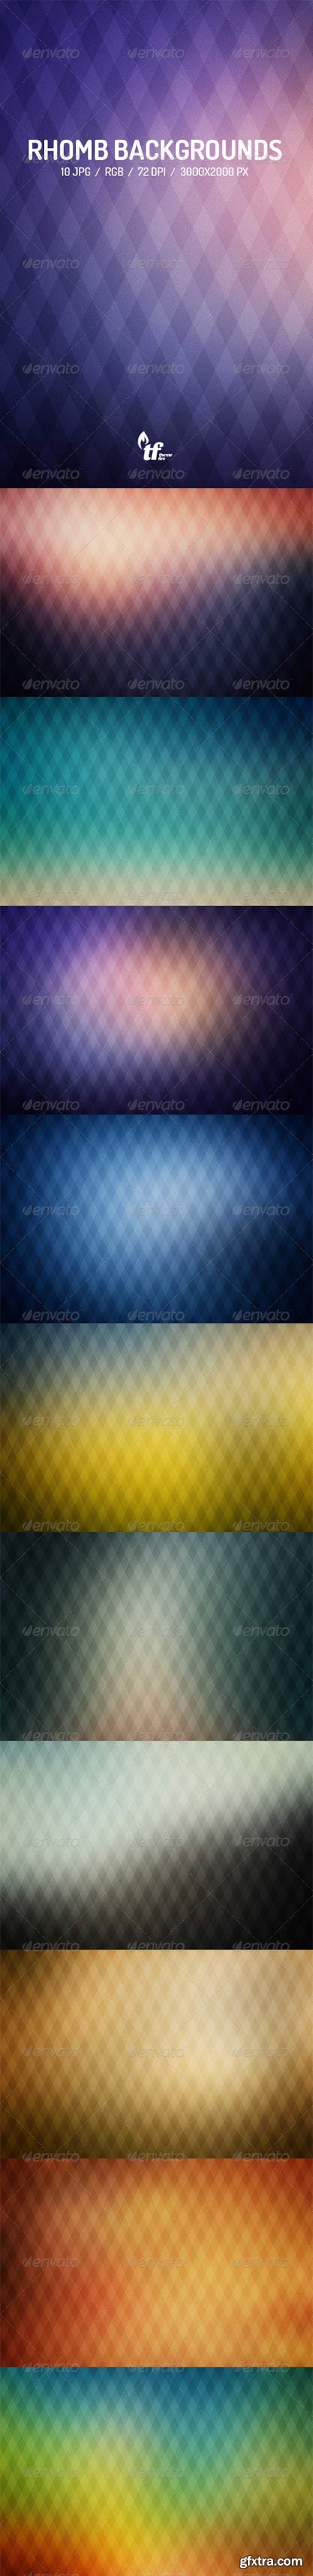 GraphicRiver - 10 Rhomb Backgrounds 7741199